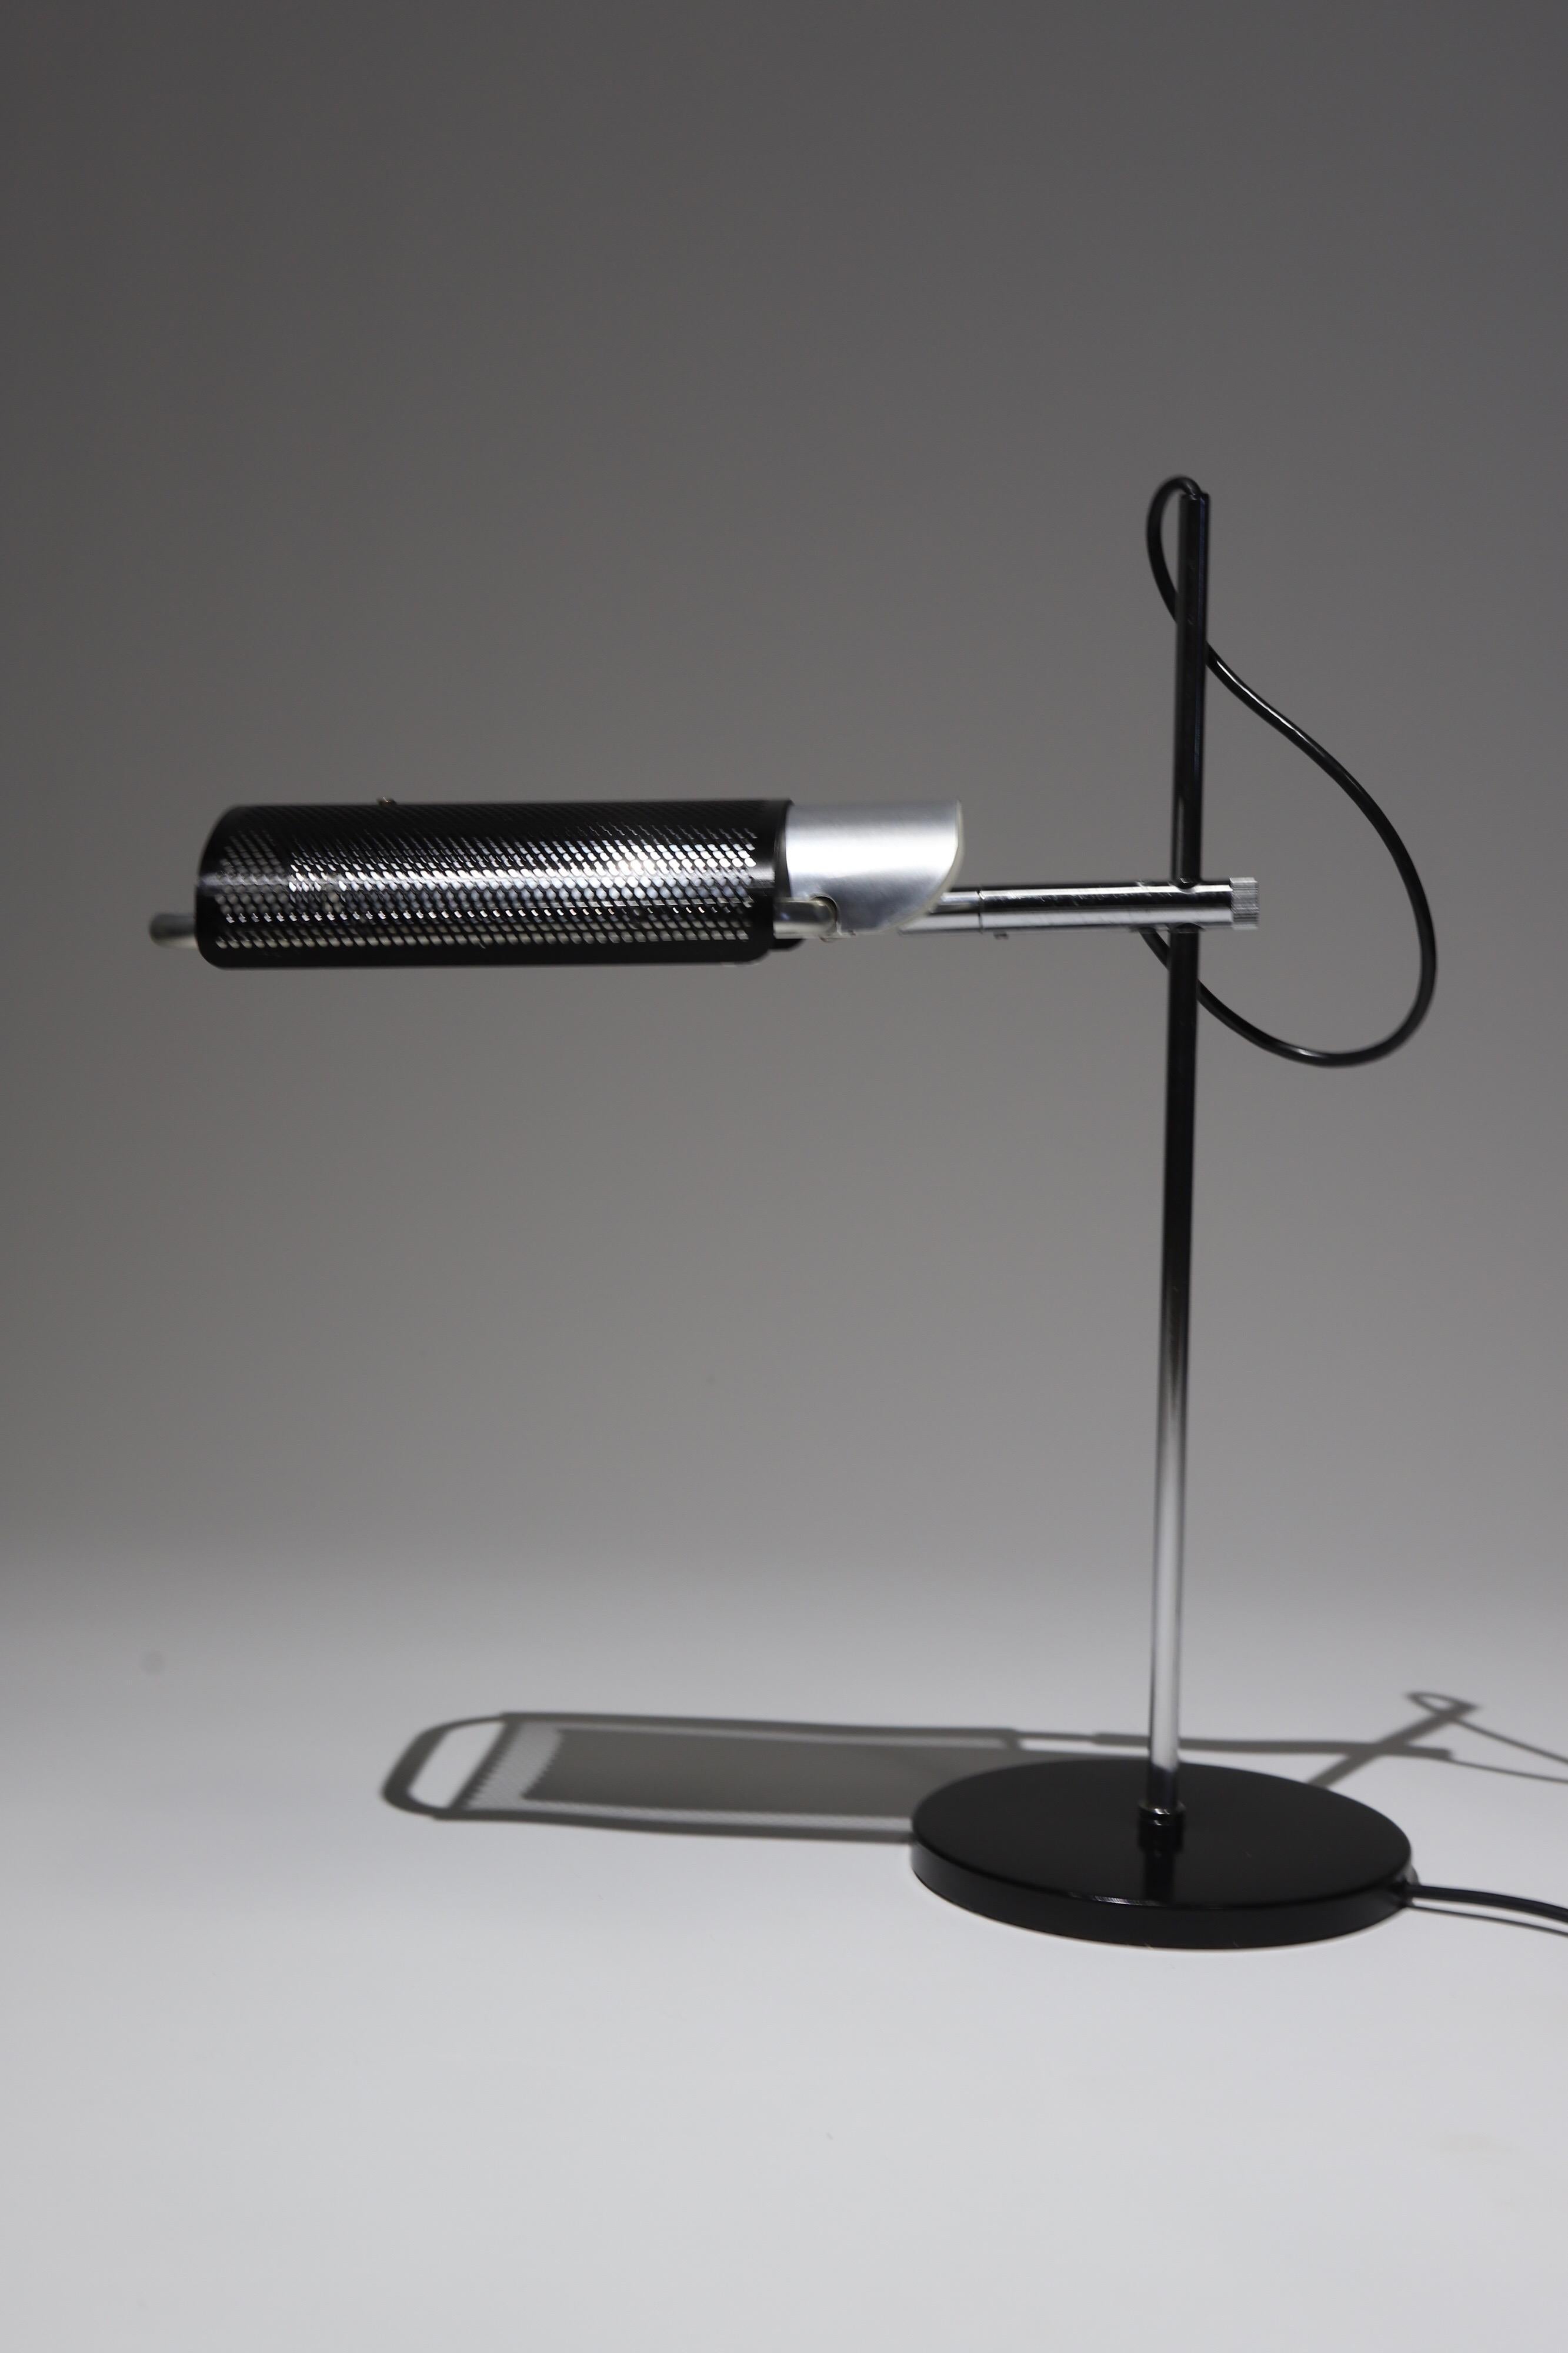 Extraordinary articulating desk lamp by George Nelson and Daniel Lewis for Koch & Lowy.